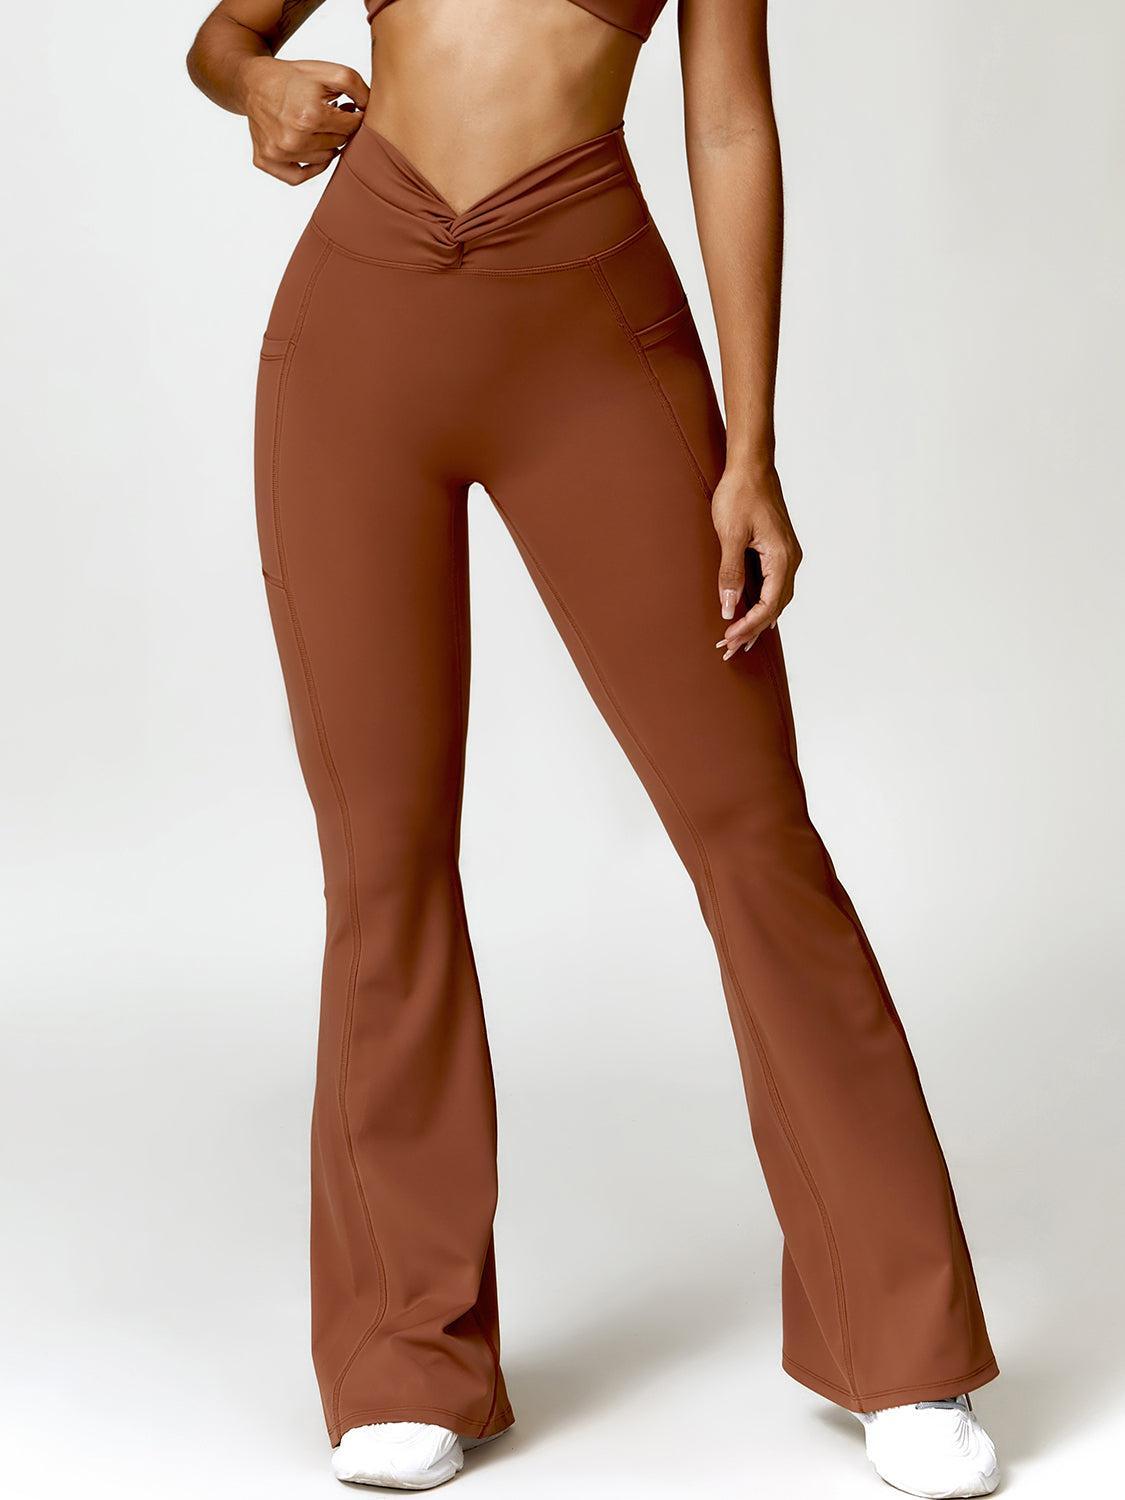 a woman in a brown sports bra top and brown pants